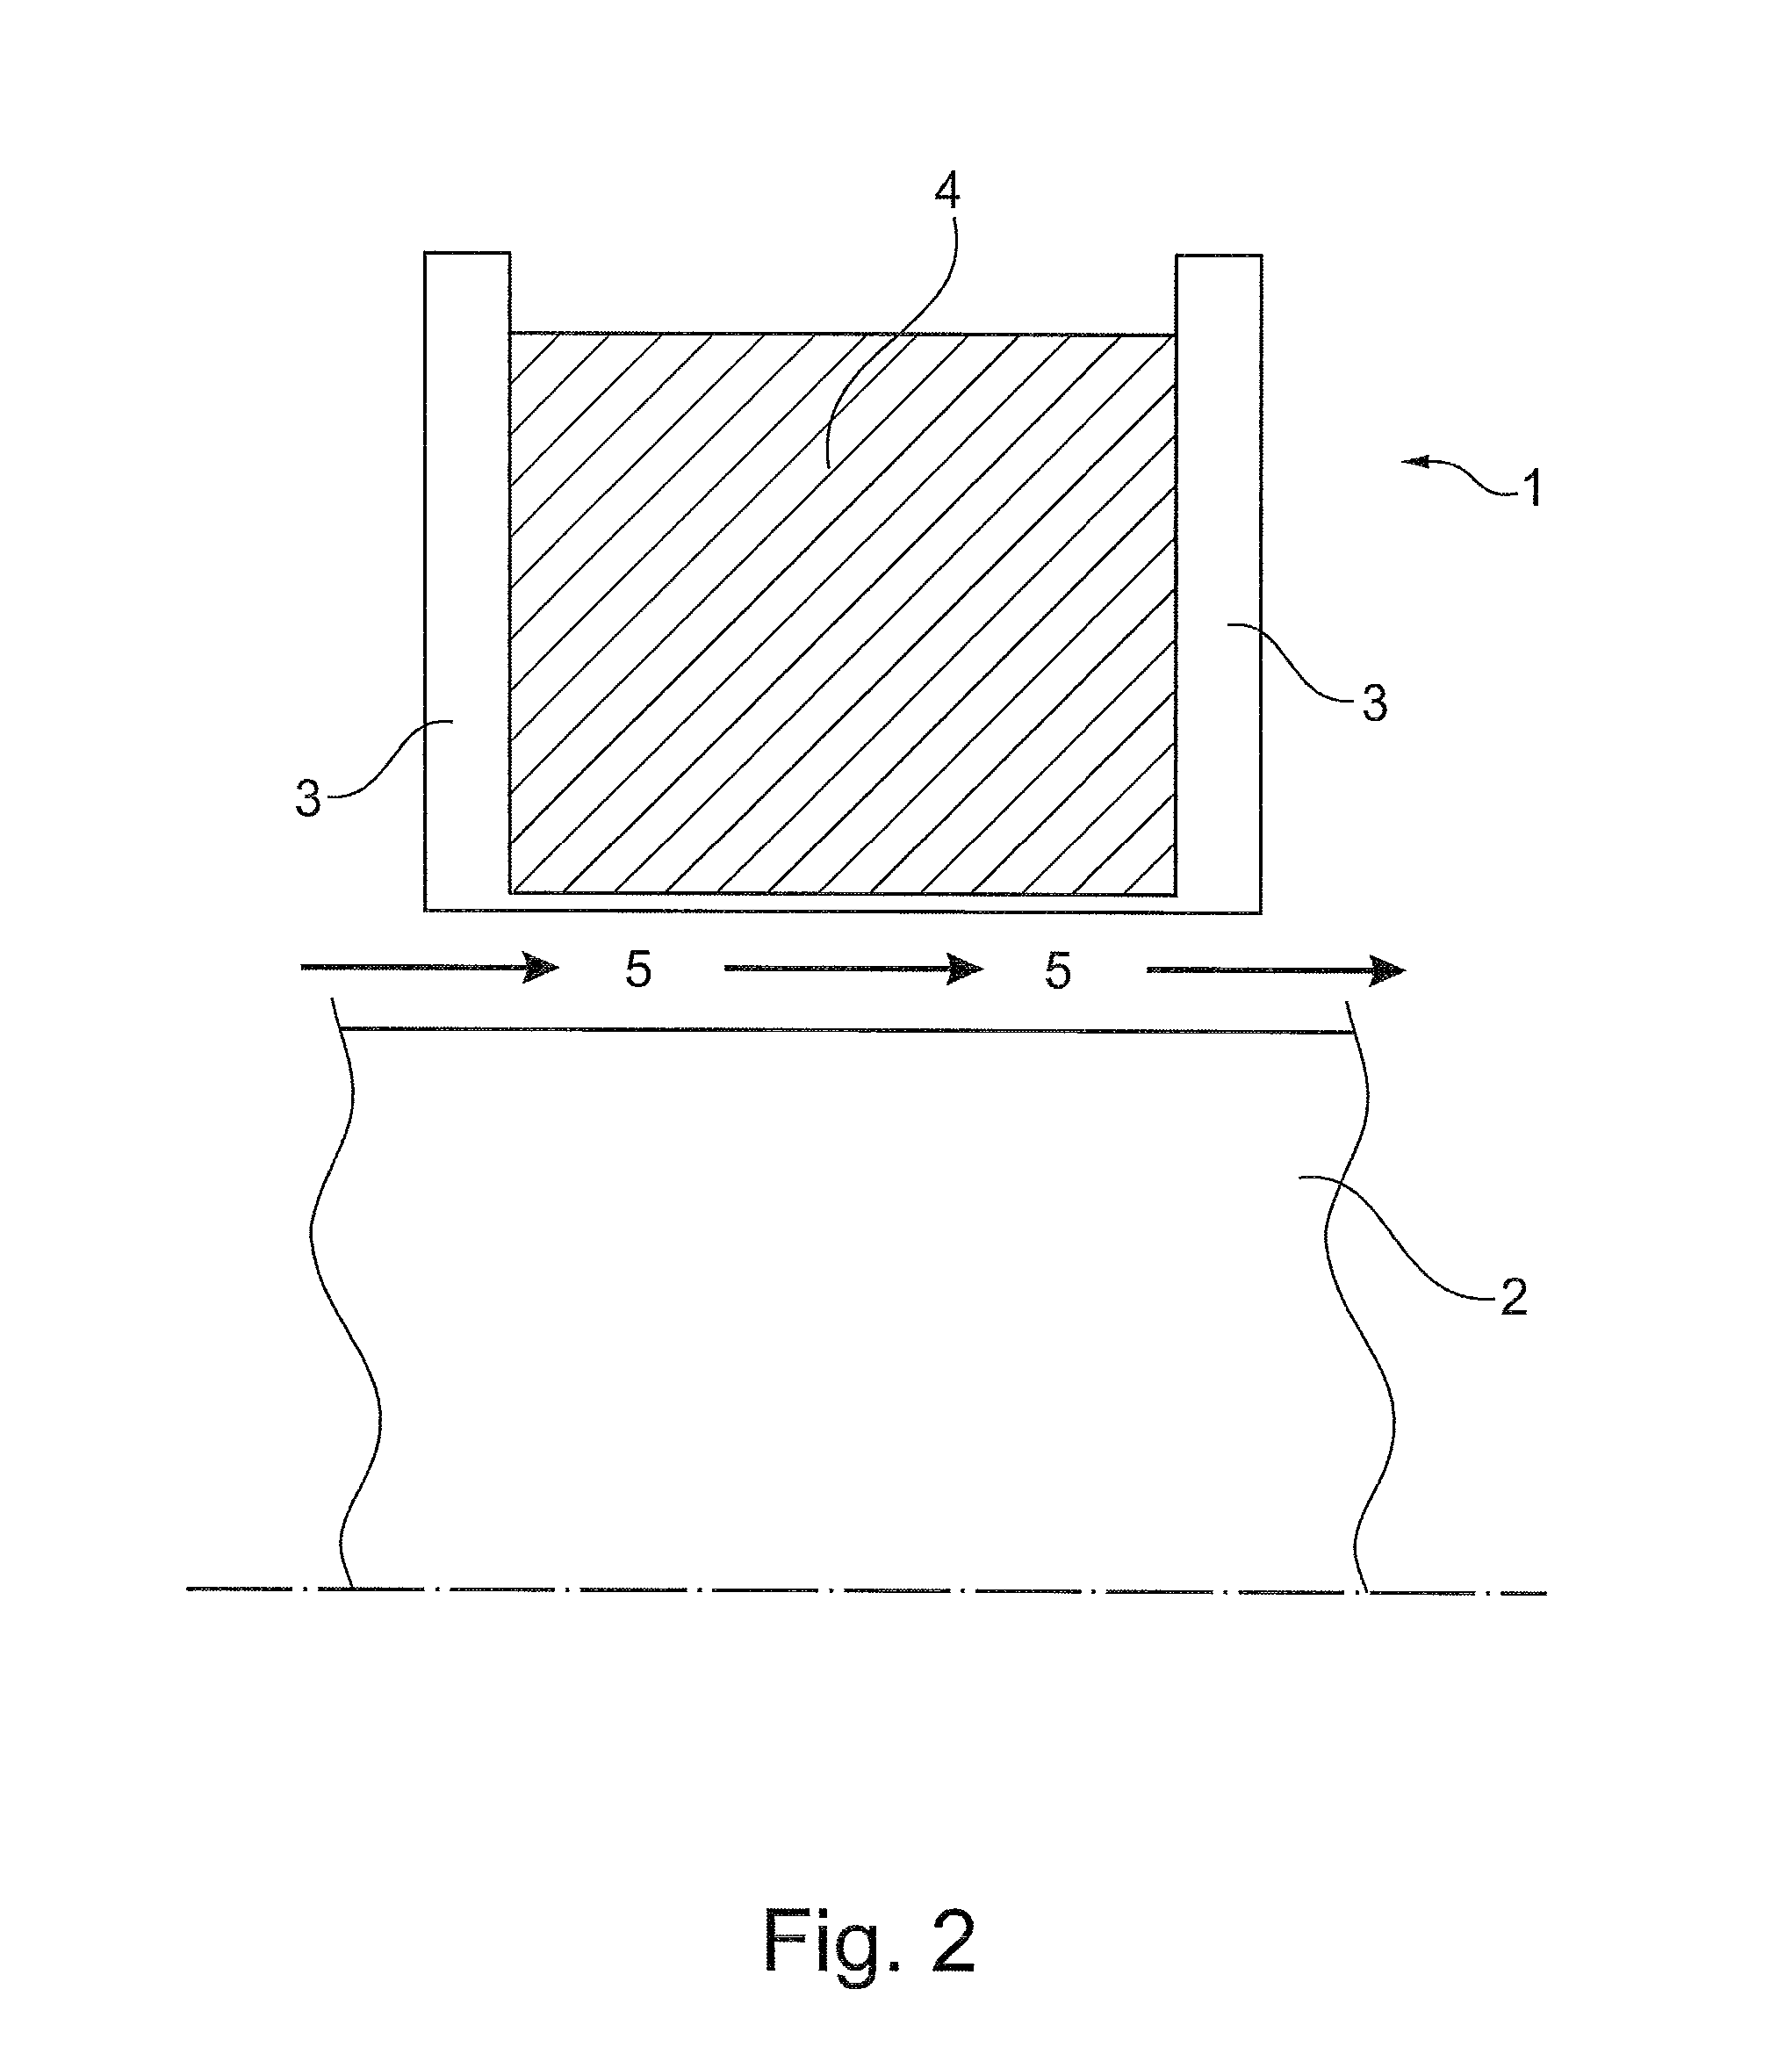 Encapsulated  magnet  assembly,  method  of  purging  a  gap rotary  machine  and  oil/gas  plant description